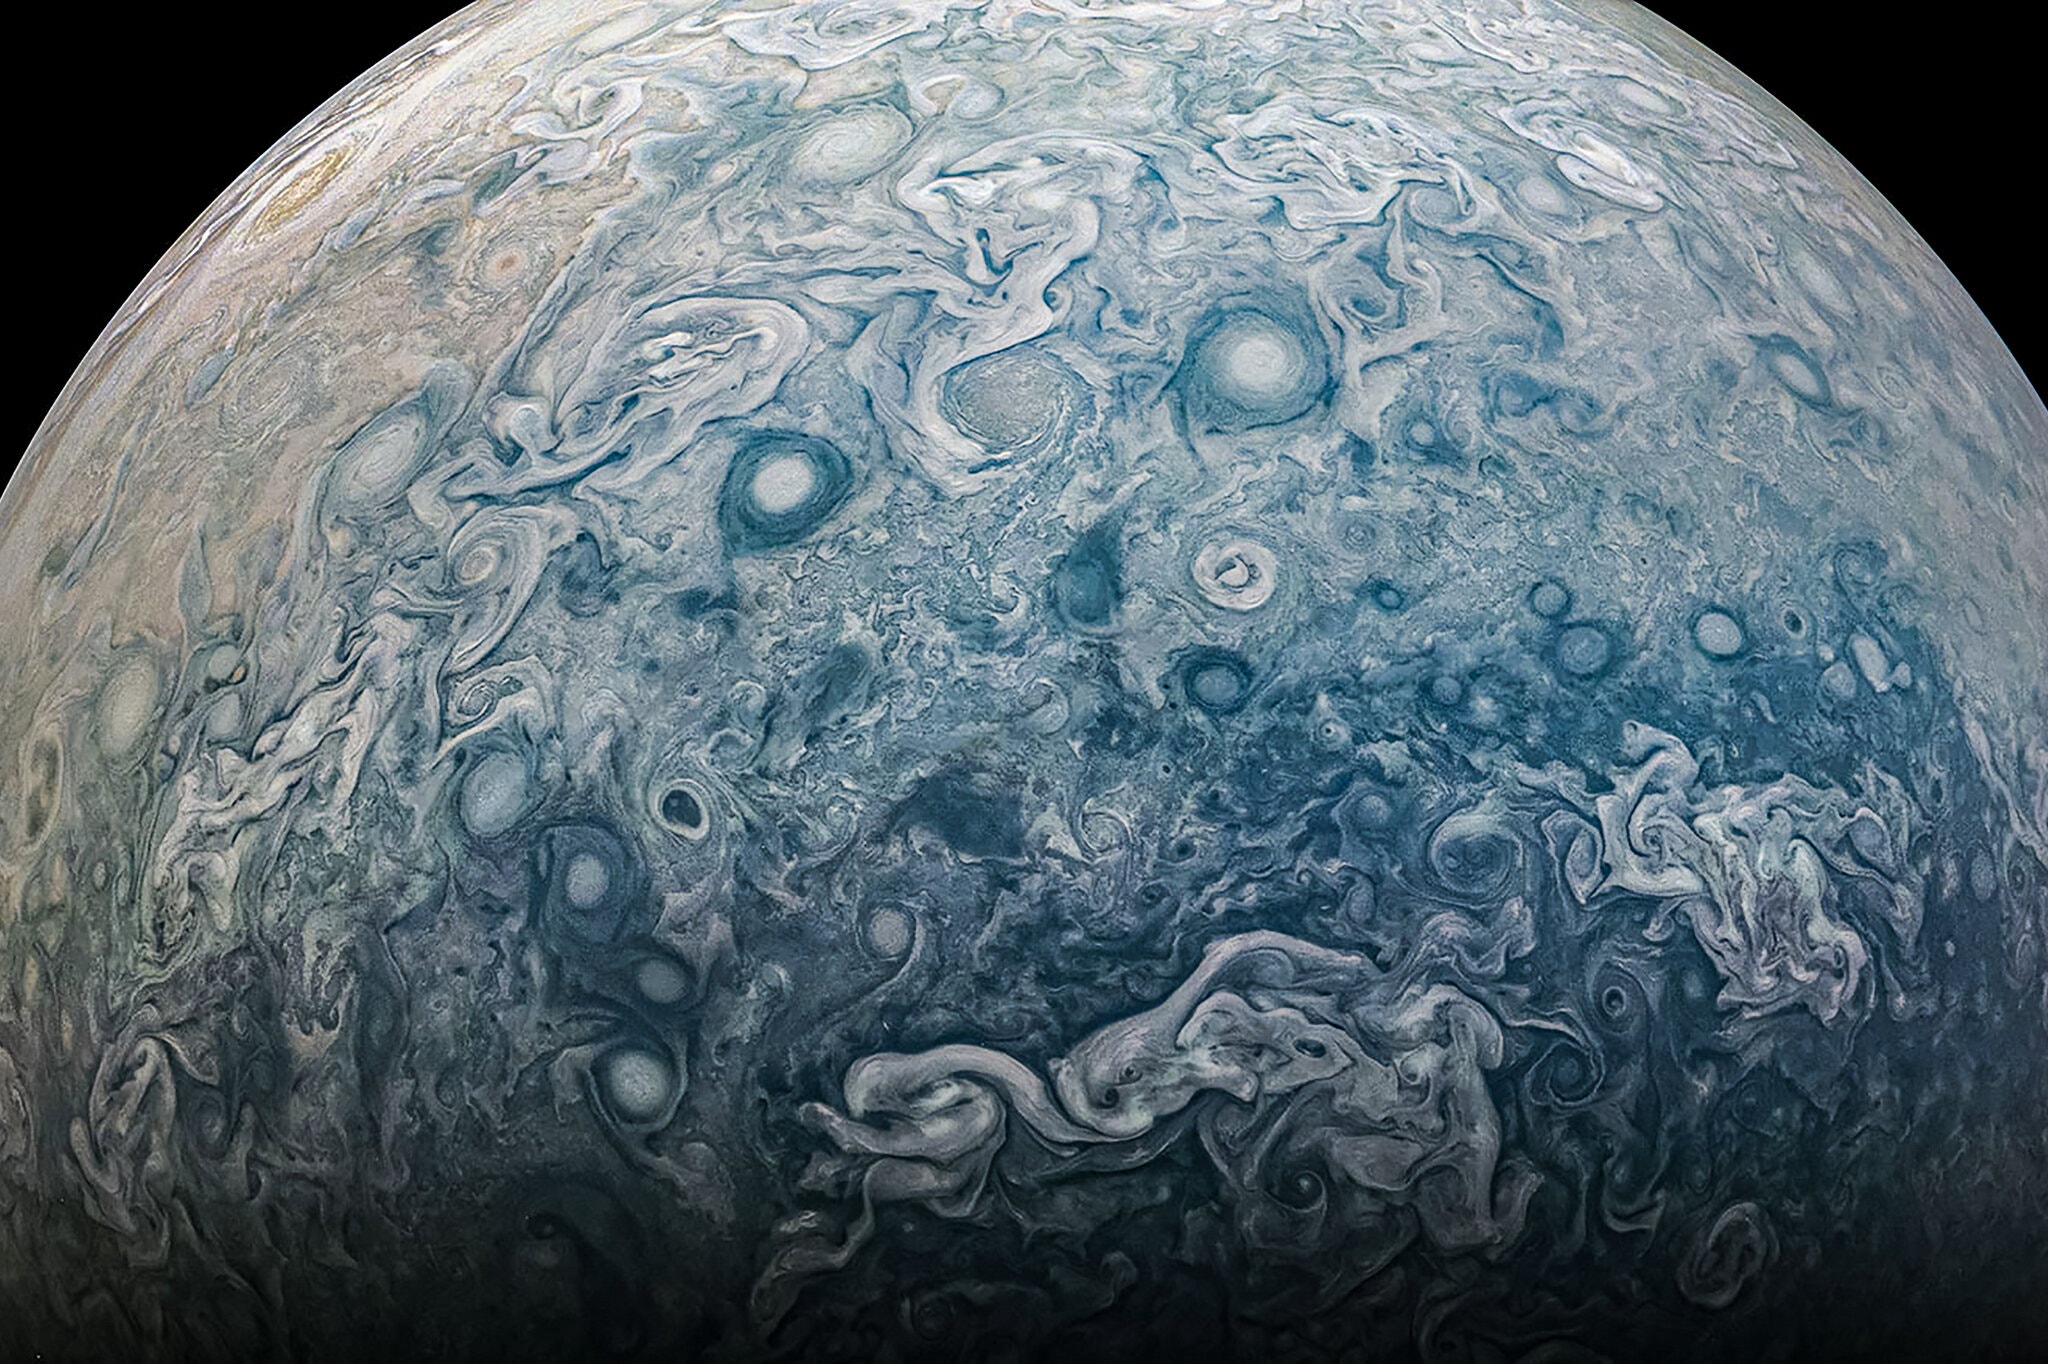 Mushballs and a Great Blue Spot: What Lies Beneath Jupiter’s Pretty Clouds